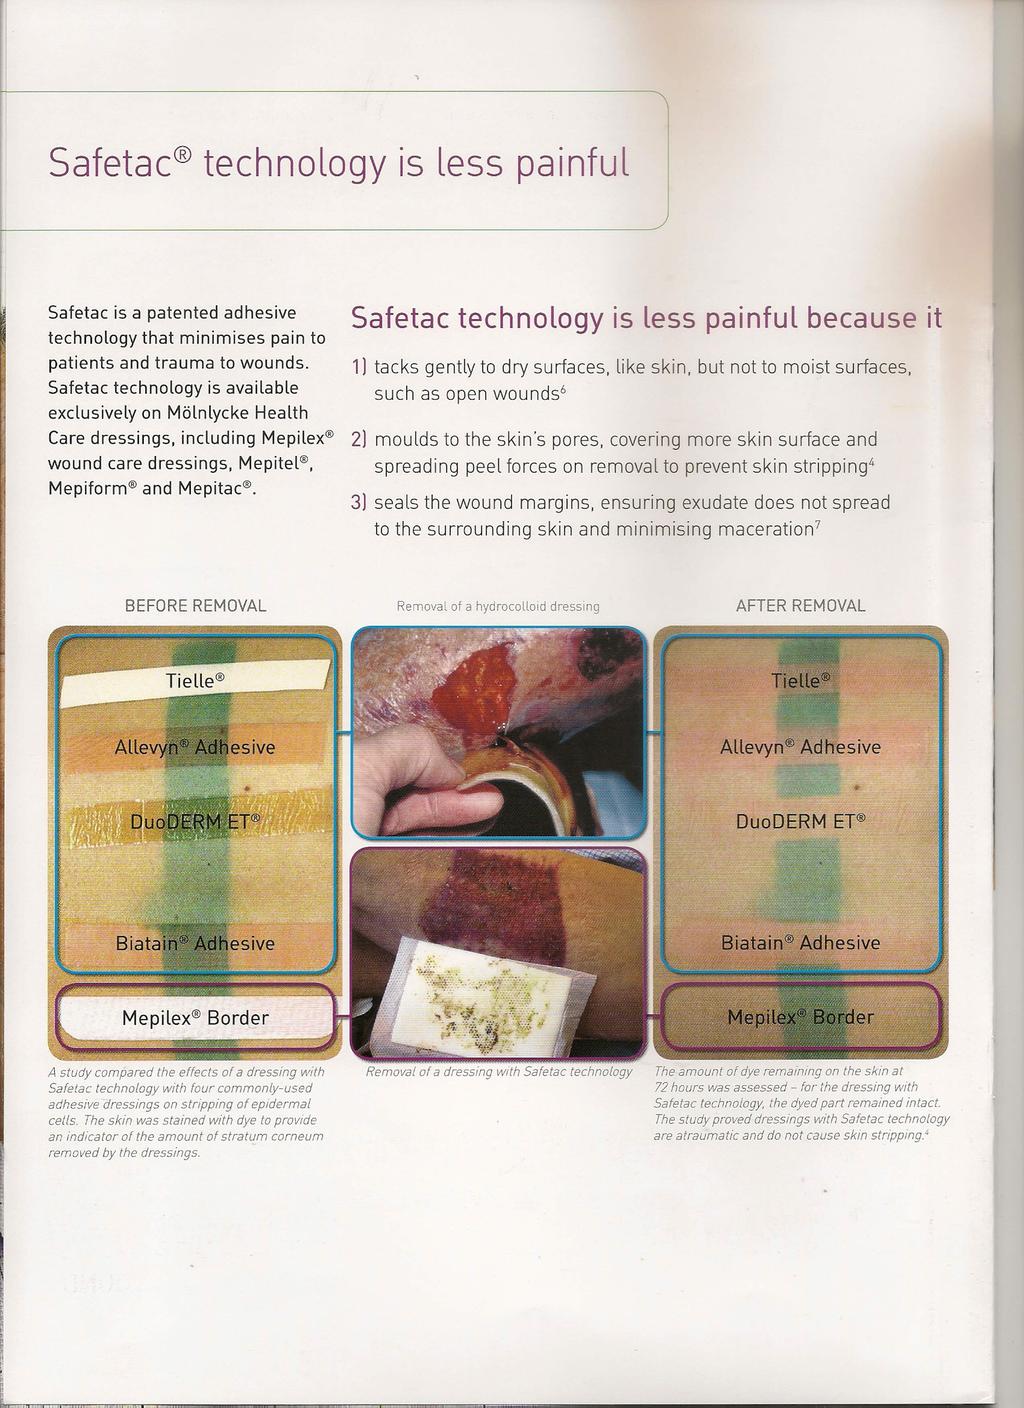 Safetac technology is less painful Safetac is a patented adhesive technology that minimises pain to patients and trauma to wounds.